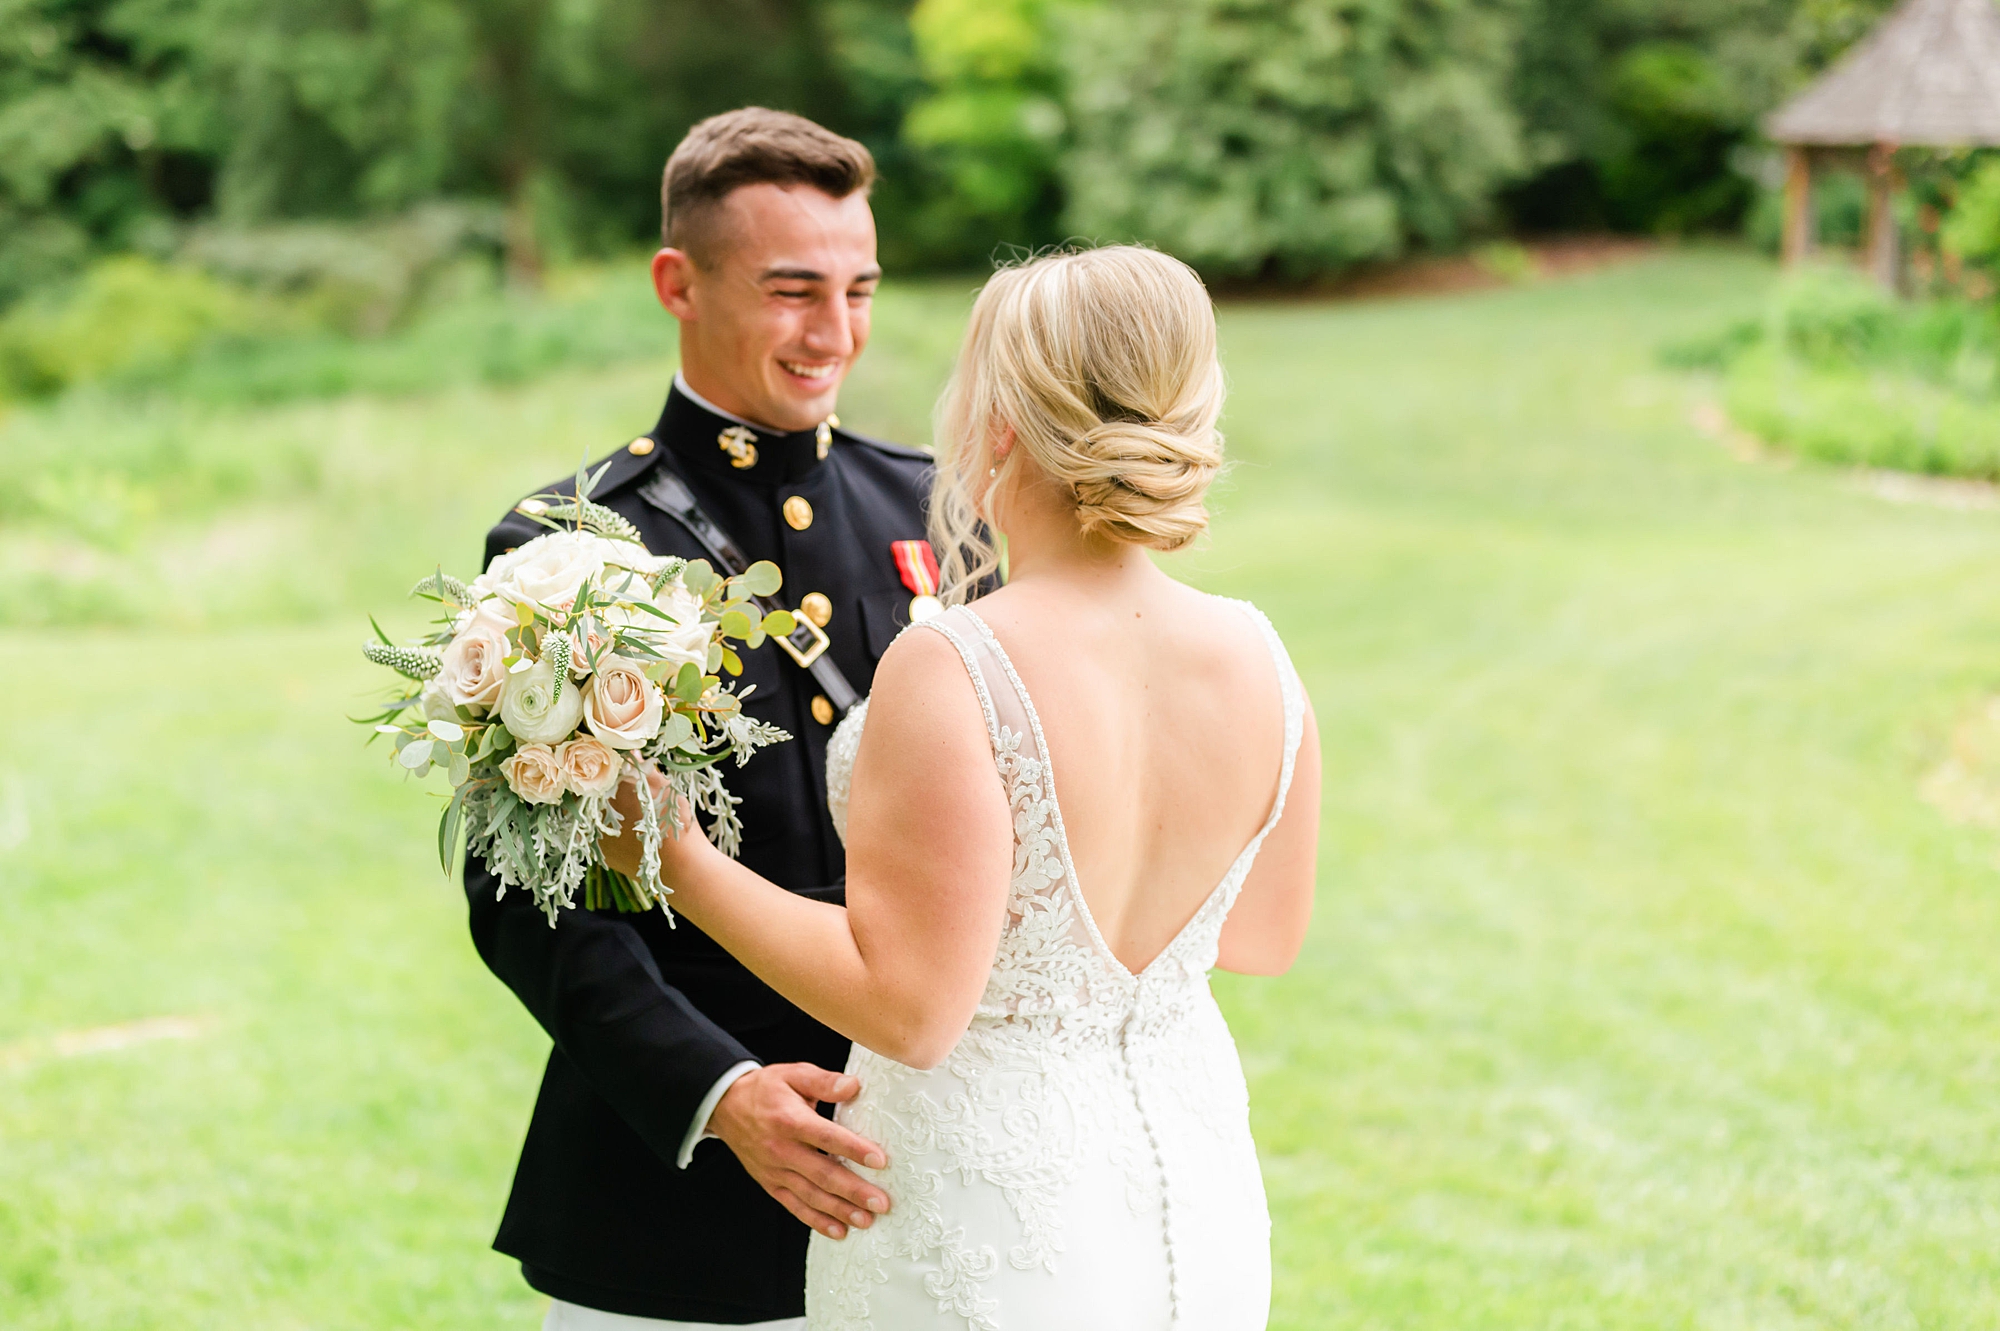 groom in Marine uniform smiles at bride during first look